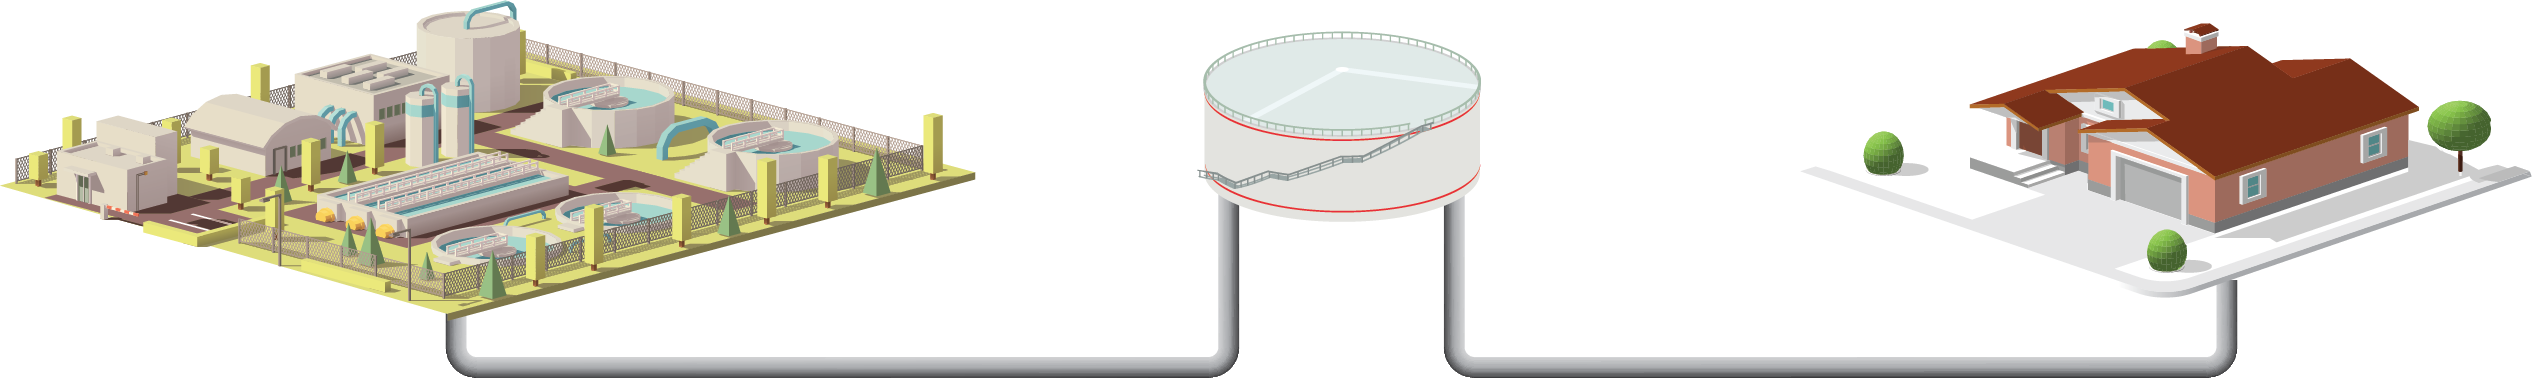 Applied water system graphic: Water treatment plant is linked to System Development Charges through a storage tank